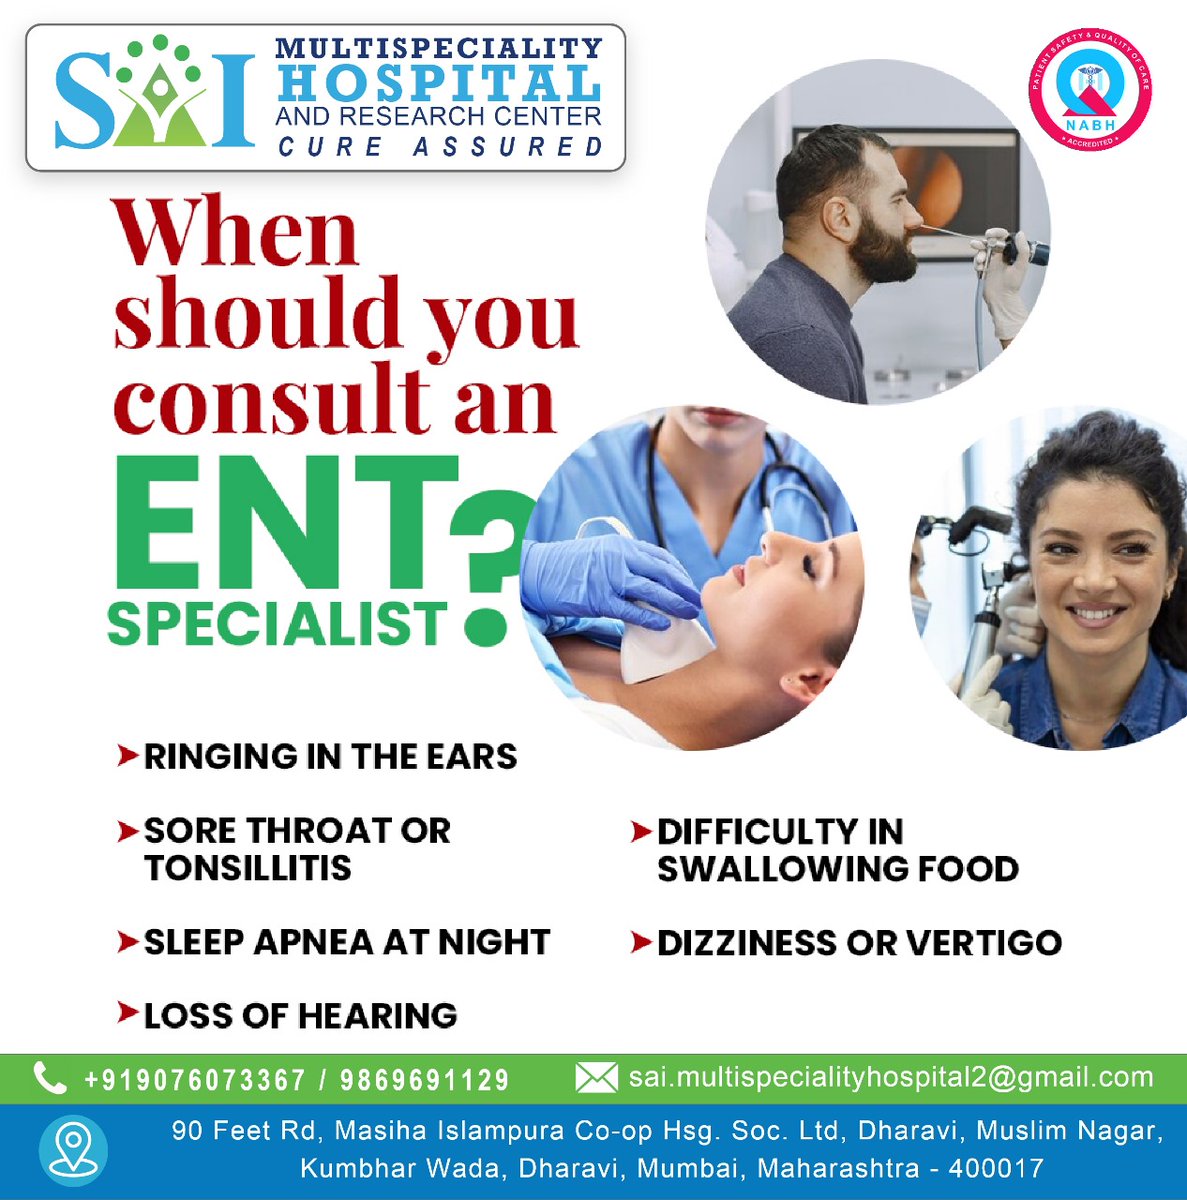 When should you consult an ENT SPECIALIST ? Contact to Sai Multispeciality Hospital ResearchCentre #hospital #entdoctor #saihospital #doctors #surgeon #mumbai